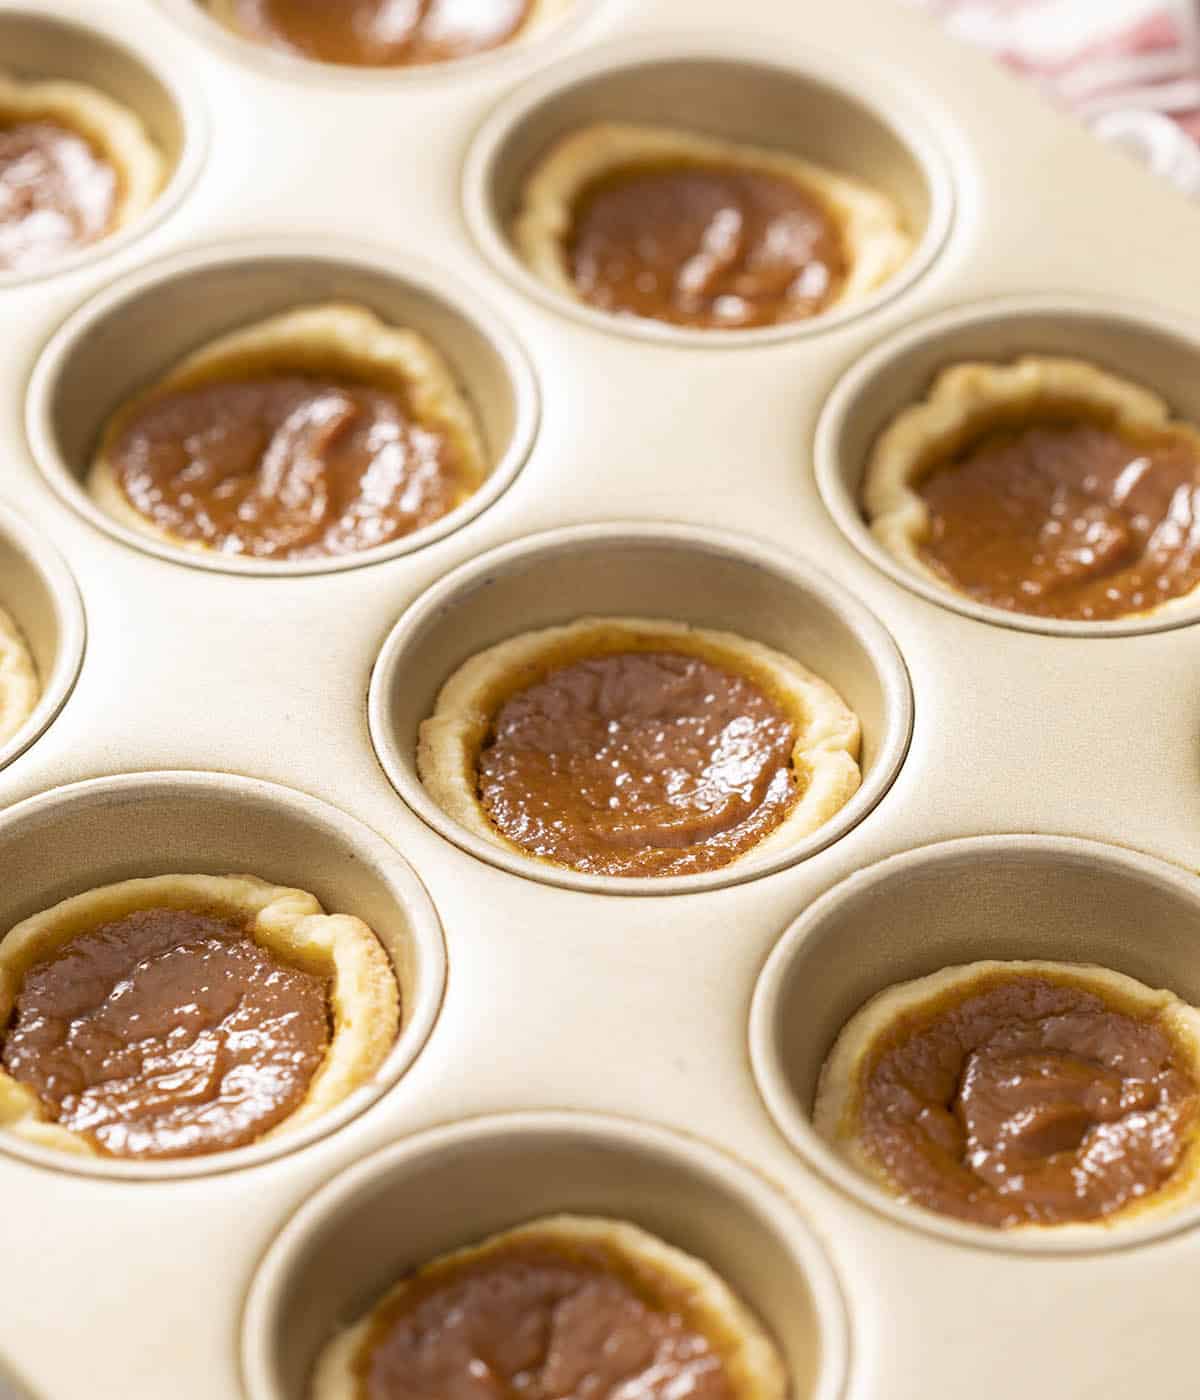 Mini pumpkin pies in a golden muffin tin just out of the oven.